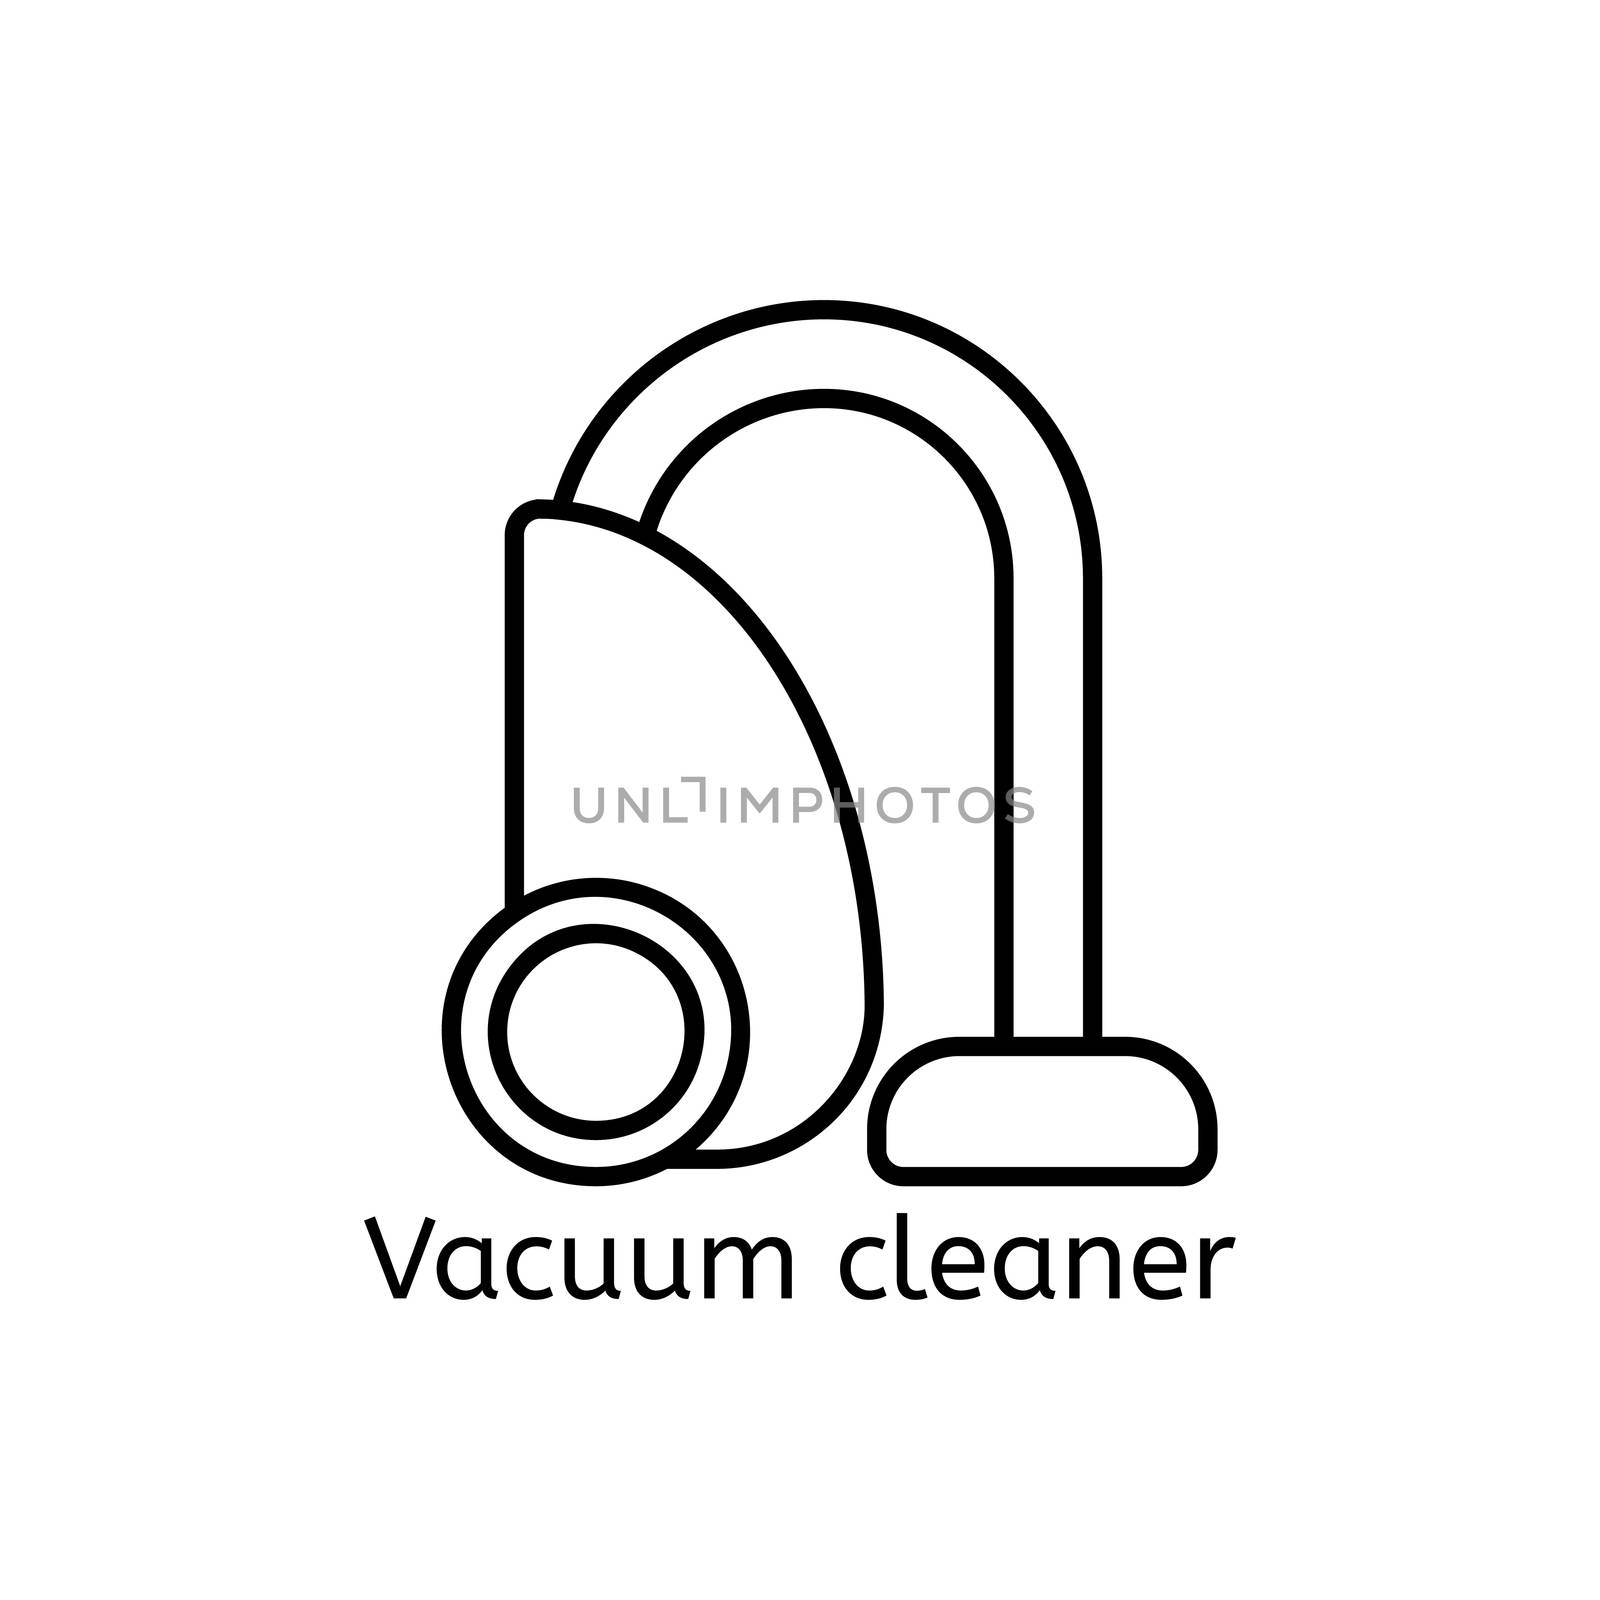 Vacuum cleaner simple line icon. Spring-cleaning thin linear signs. Clean simple concept for websites, infographic, mobile app